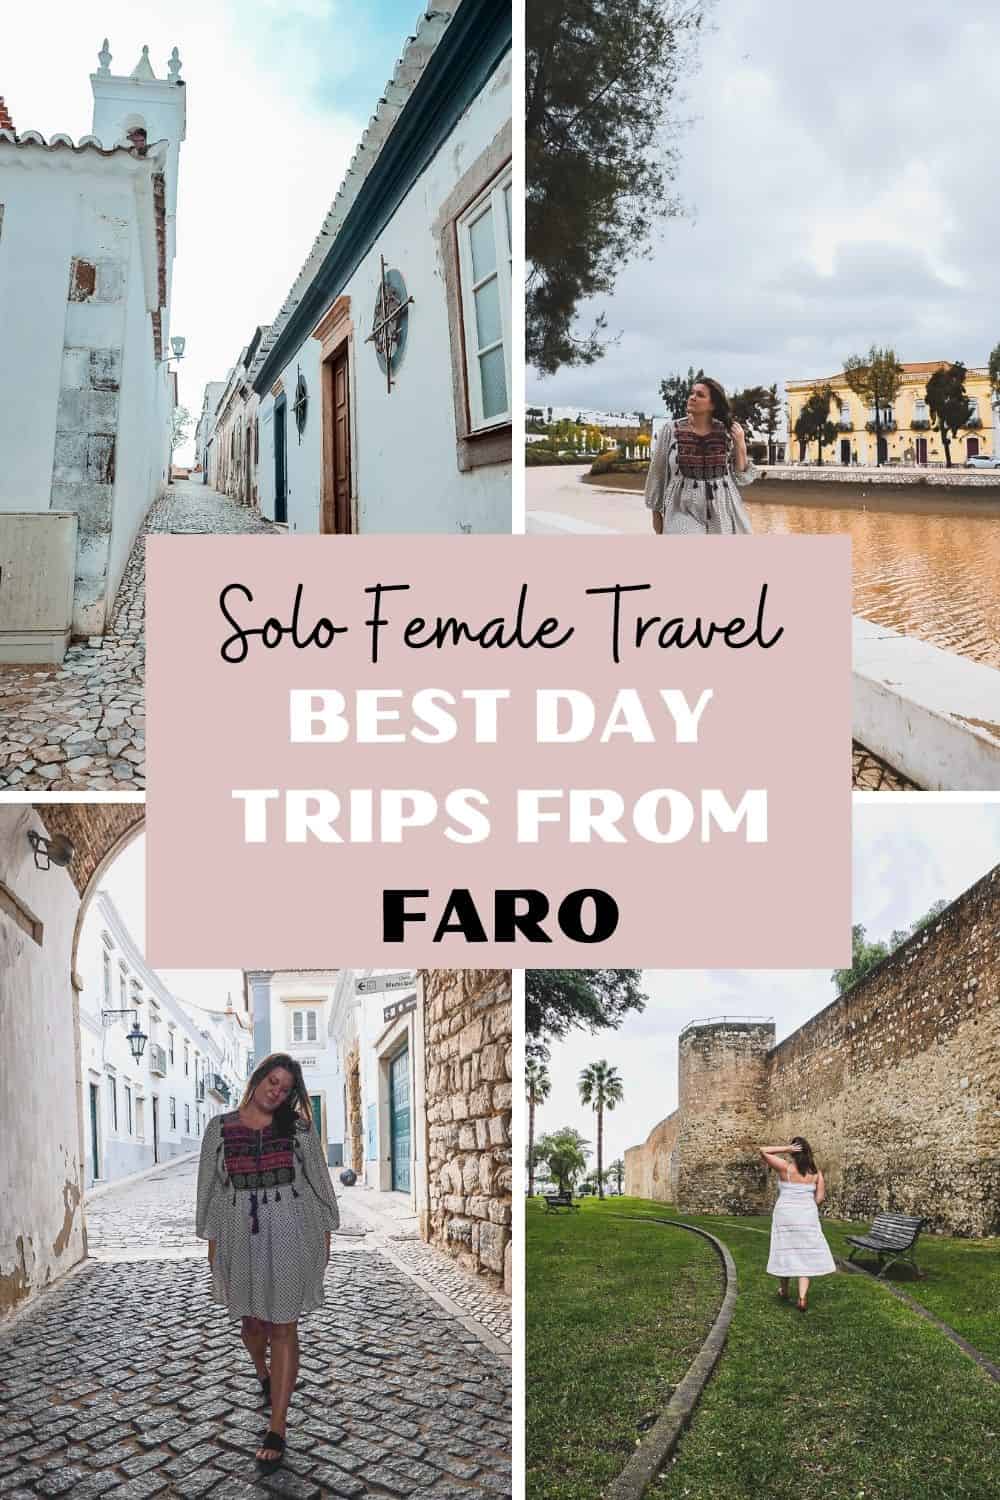 Best Day Trips from Faro